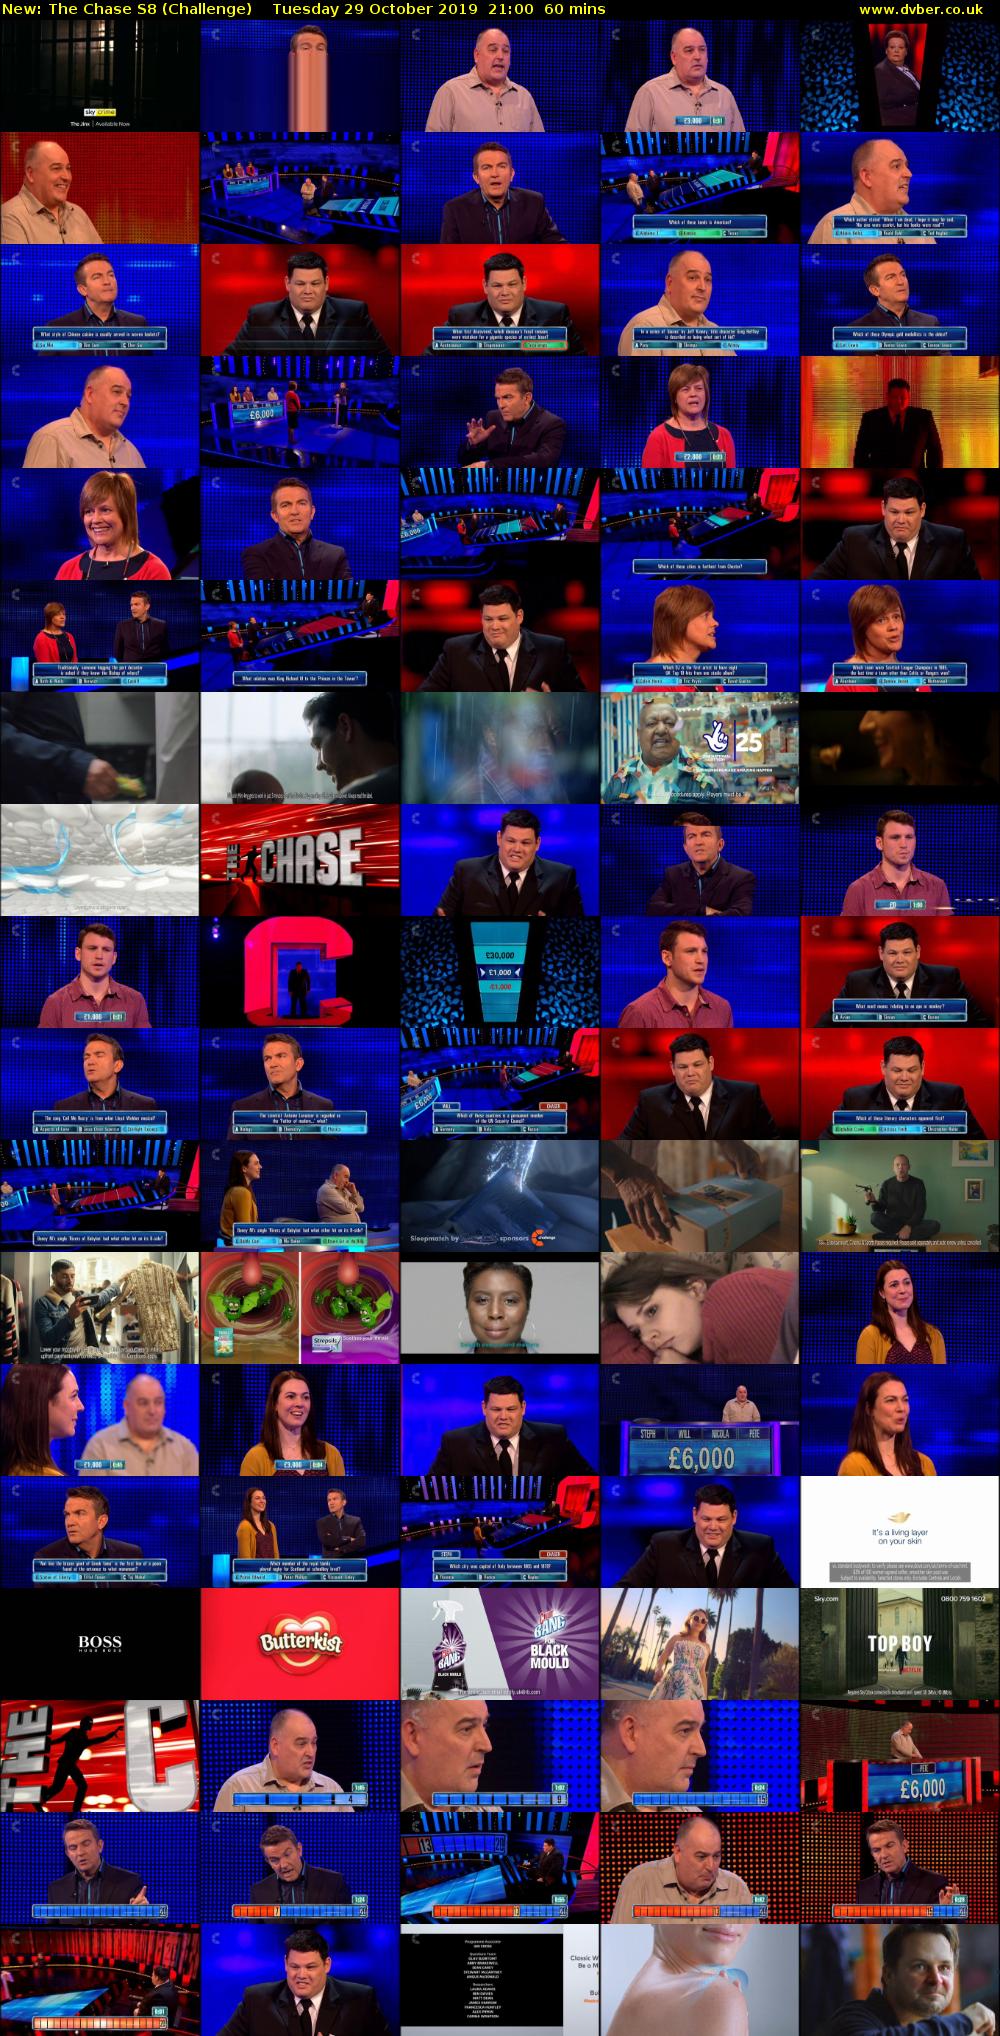 The Chase S8 (Challenge) Tuesday 29 October 2019 21:00 - 22:00